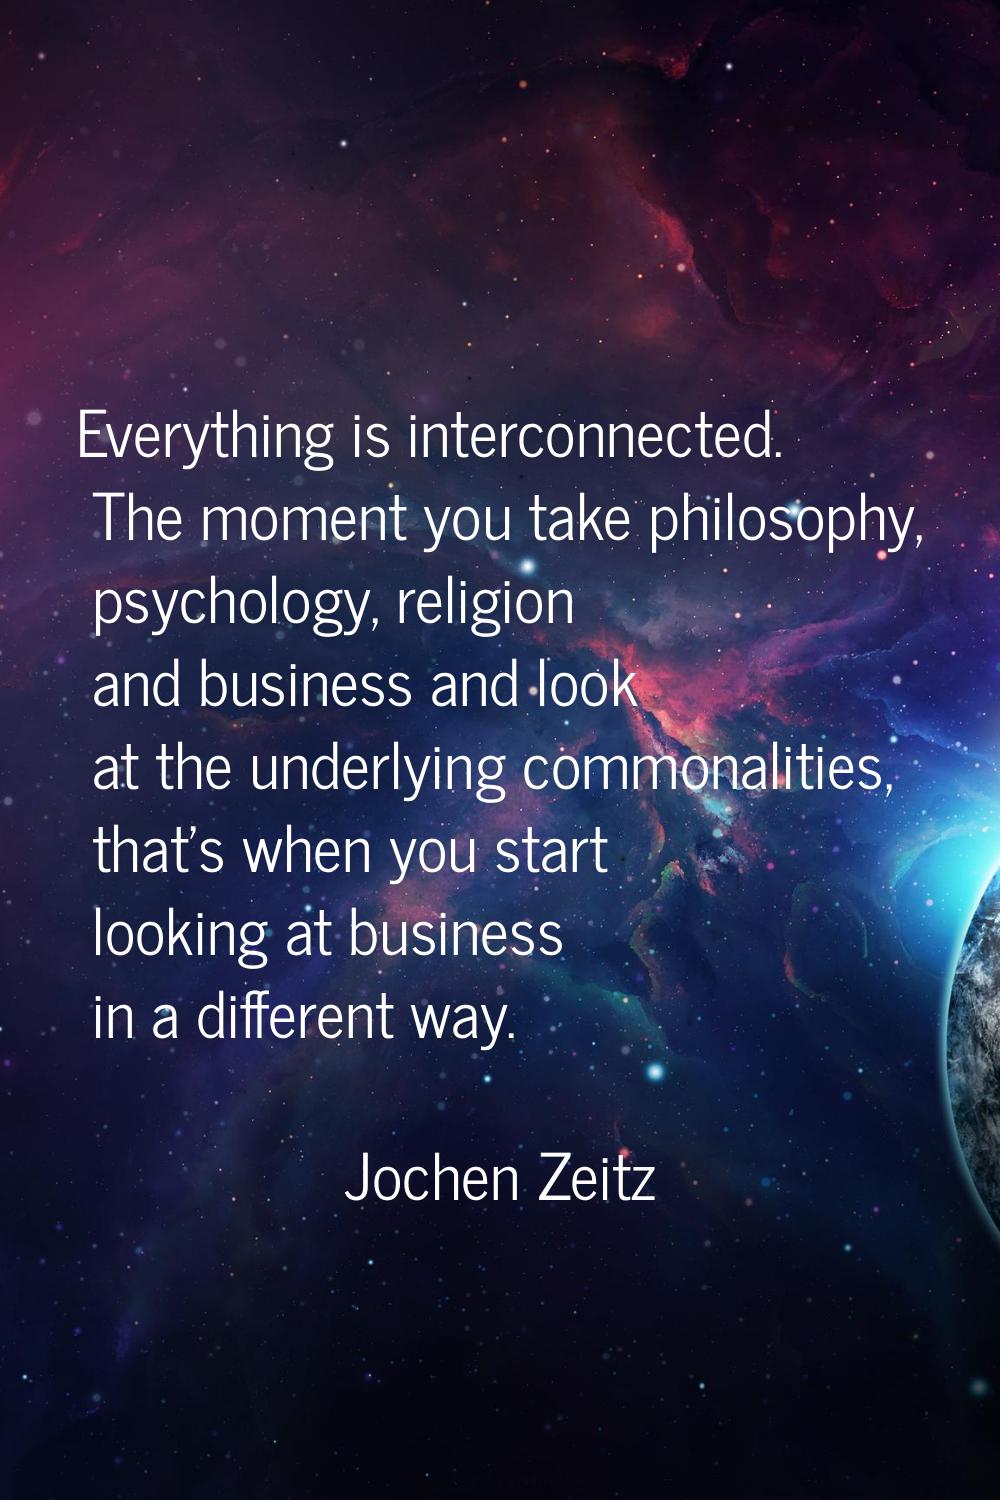 Everything is interconnected. The moment you take philosophy, psychology, religion and business and